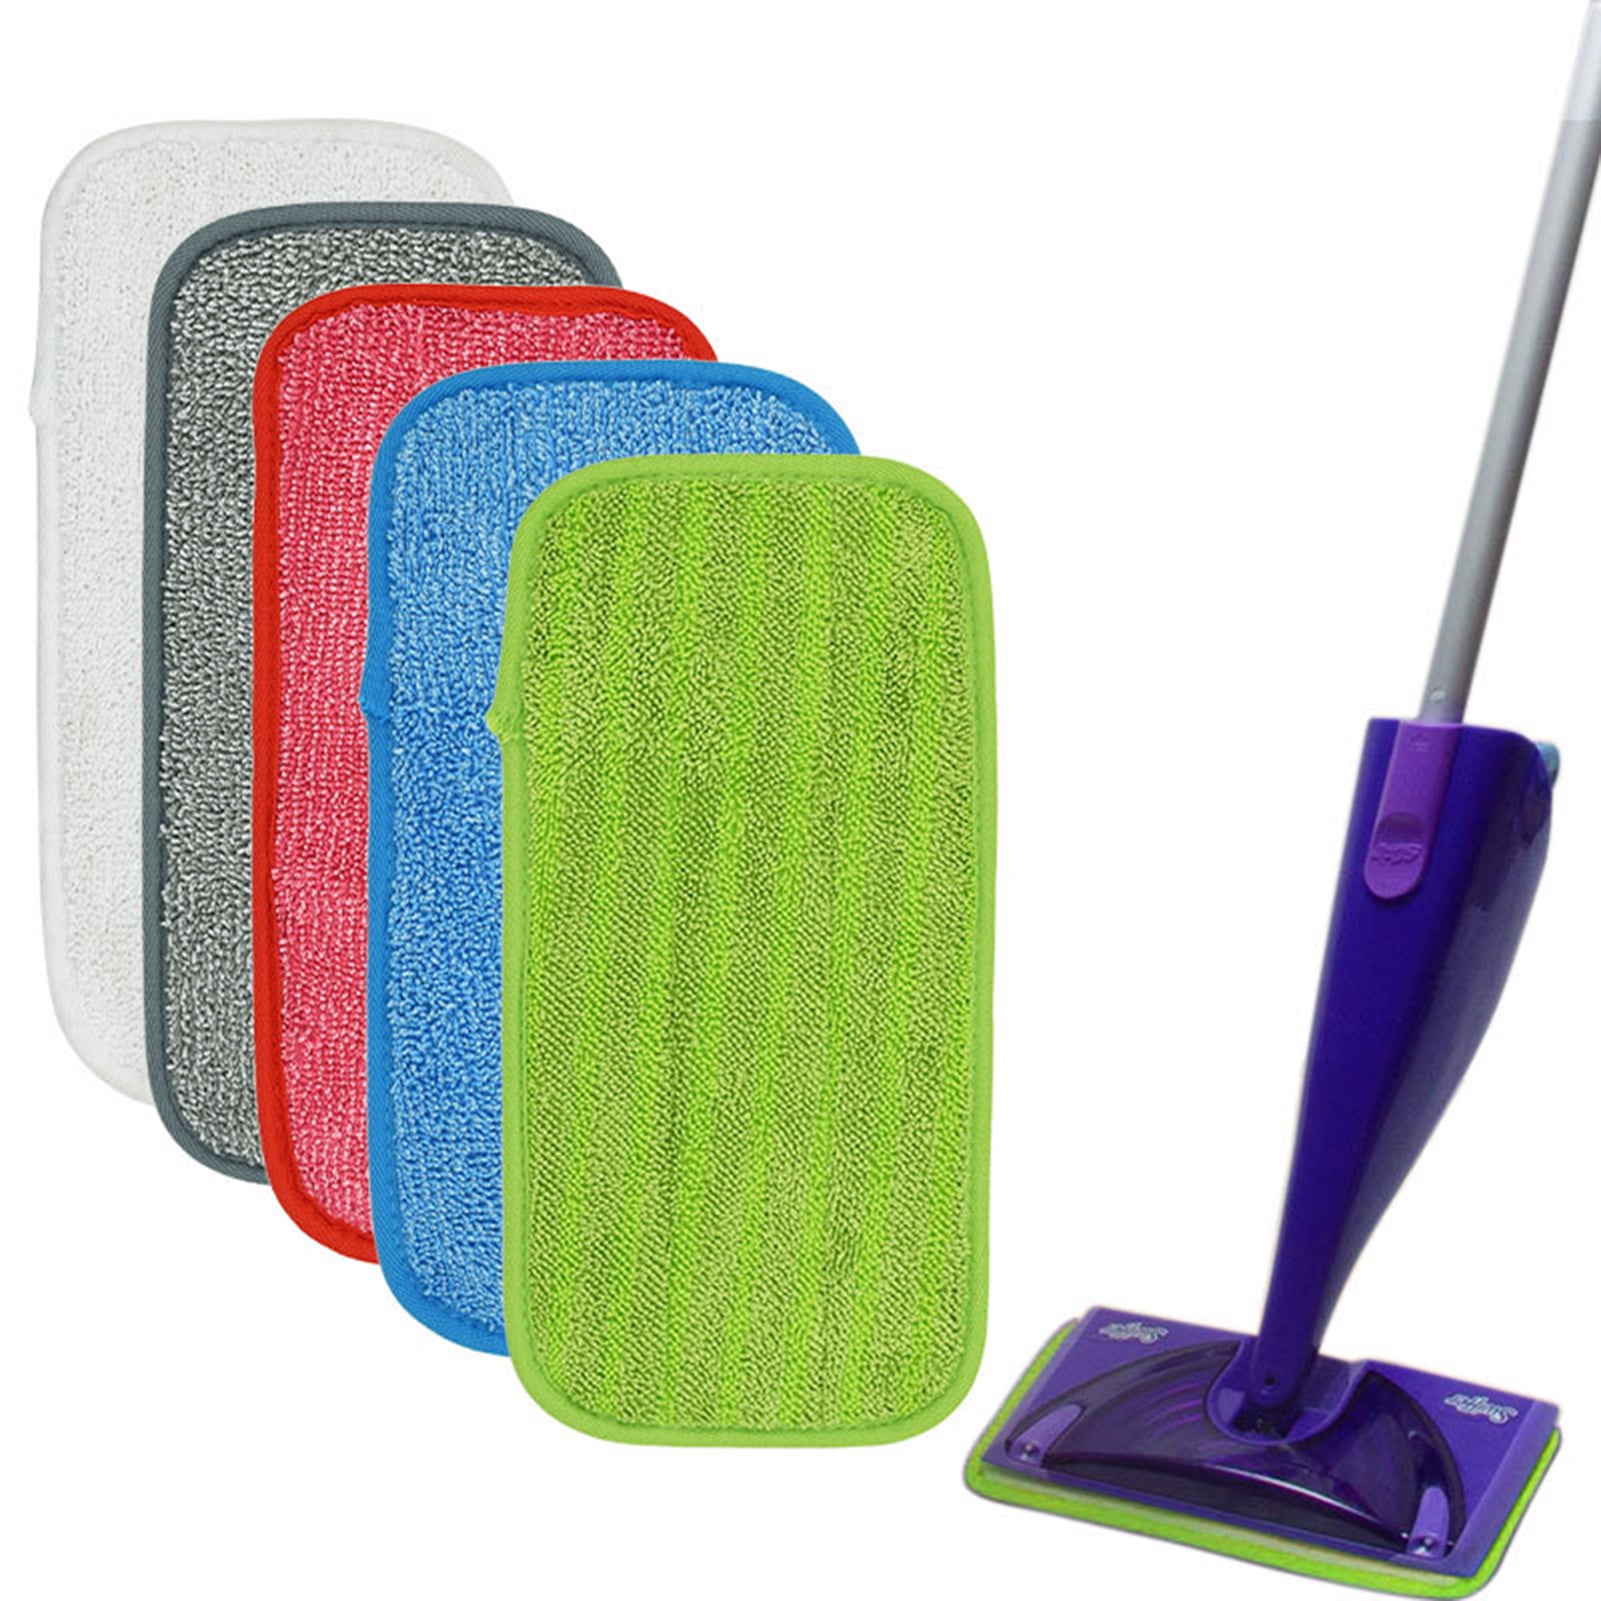 Hometimes 6 Packs Spray Mop Refills For Rubbermaid Reveal, Floor Mop  Washable Microfiber Cleaning Pads, Dry Wet Dual-use Replacement Mop Heads